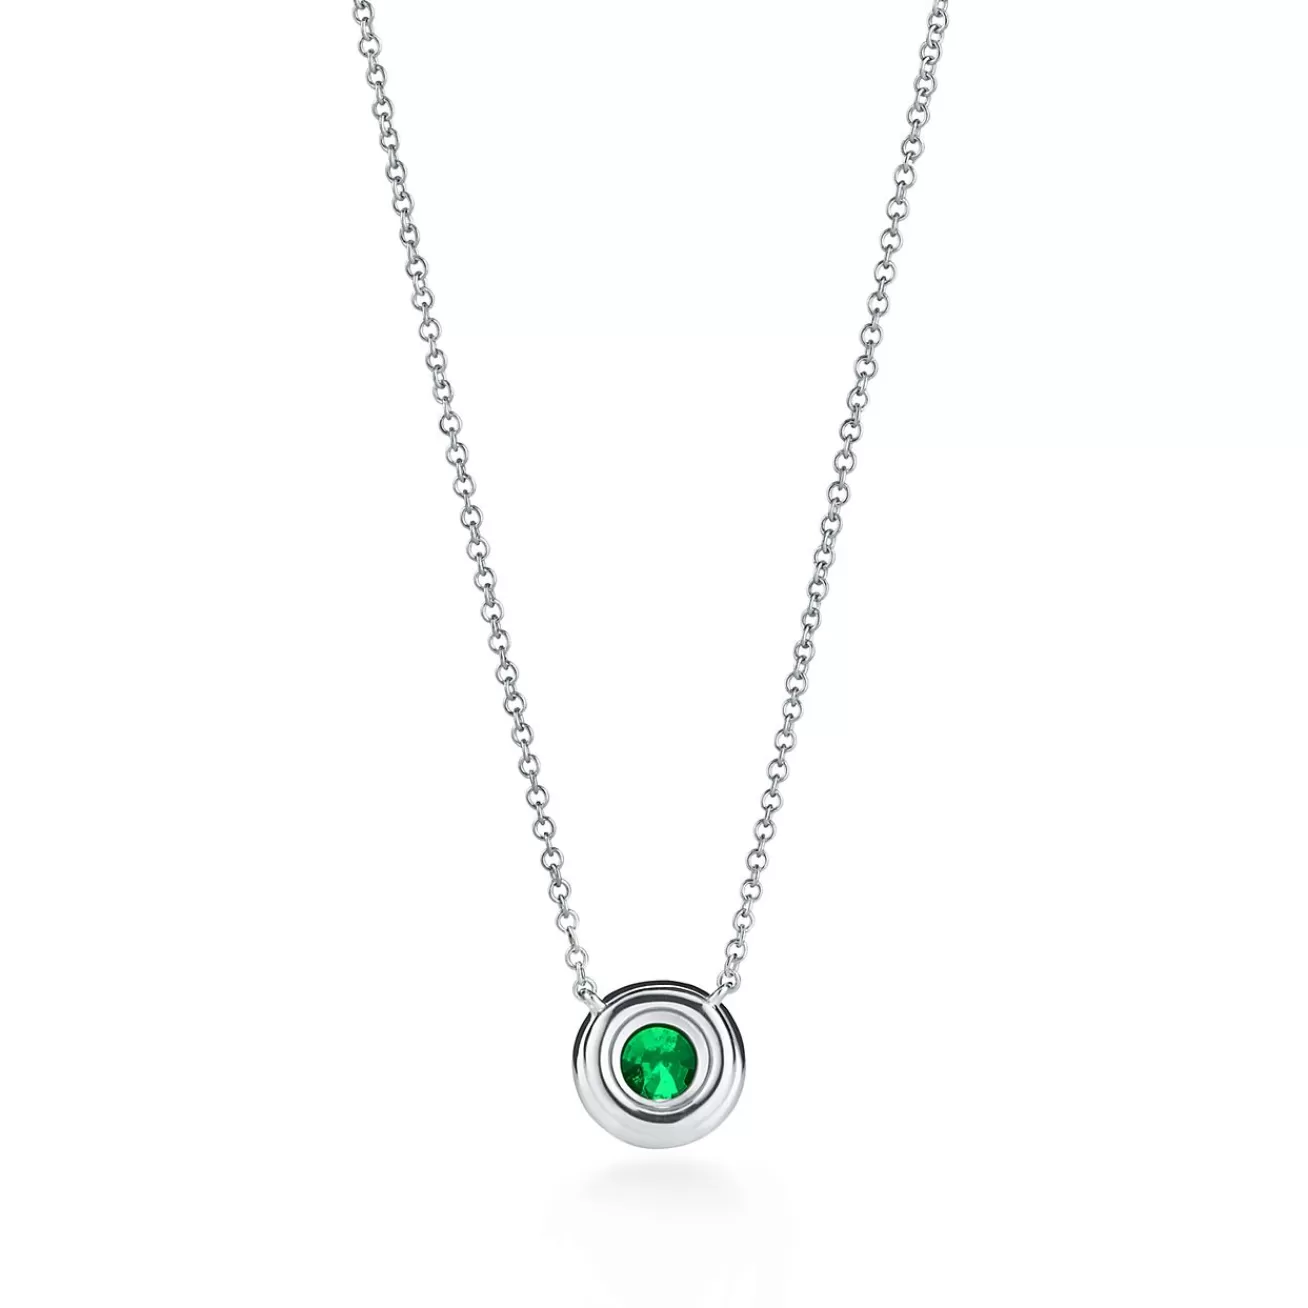 Tiffany & Co. Tiffany Soleste® pendant in platinum with diamonds and an emerald. | ^ Necklaces & Pendants | Platinum Jewelry